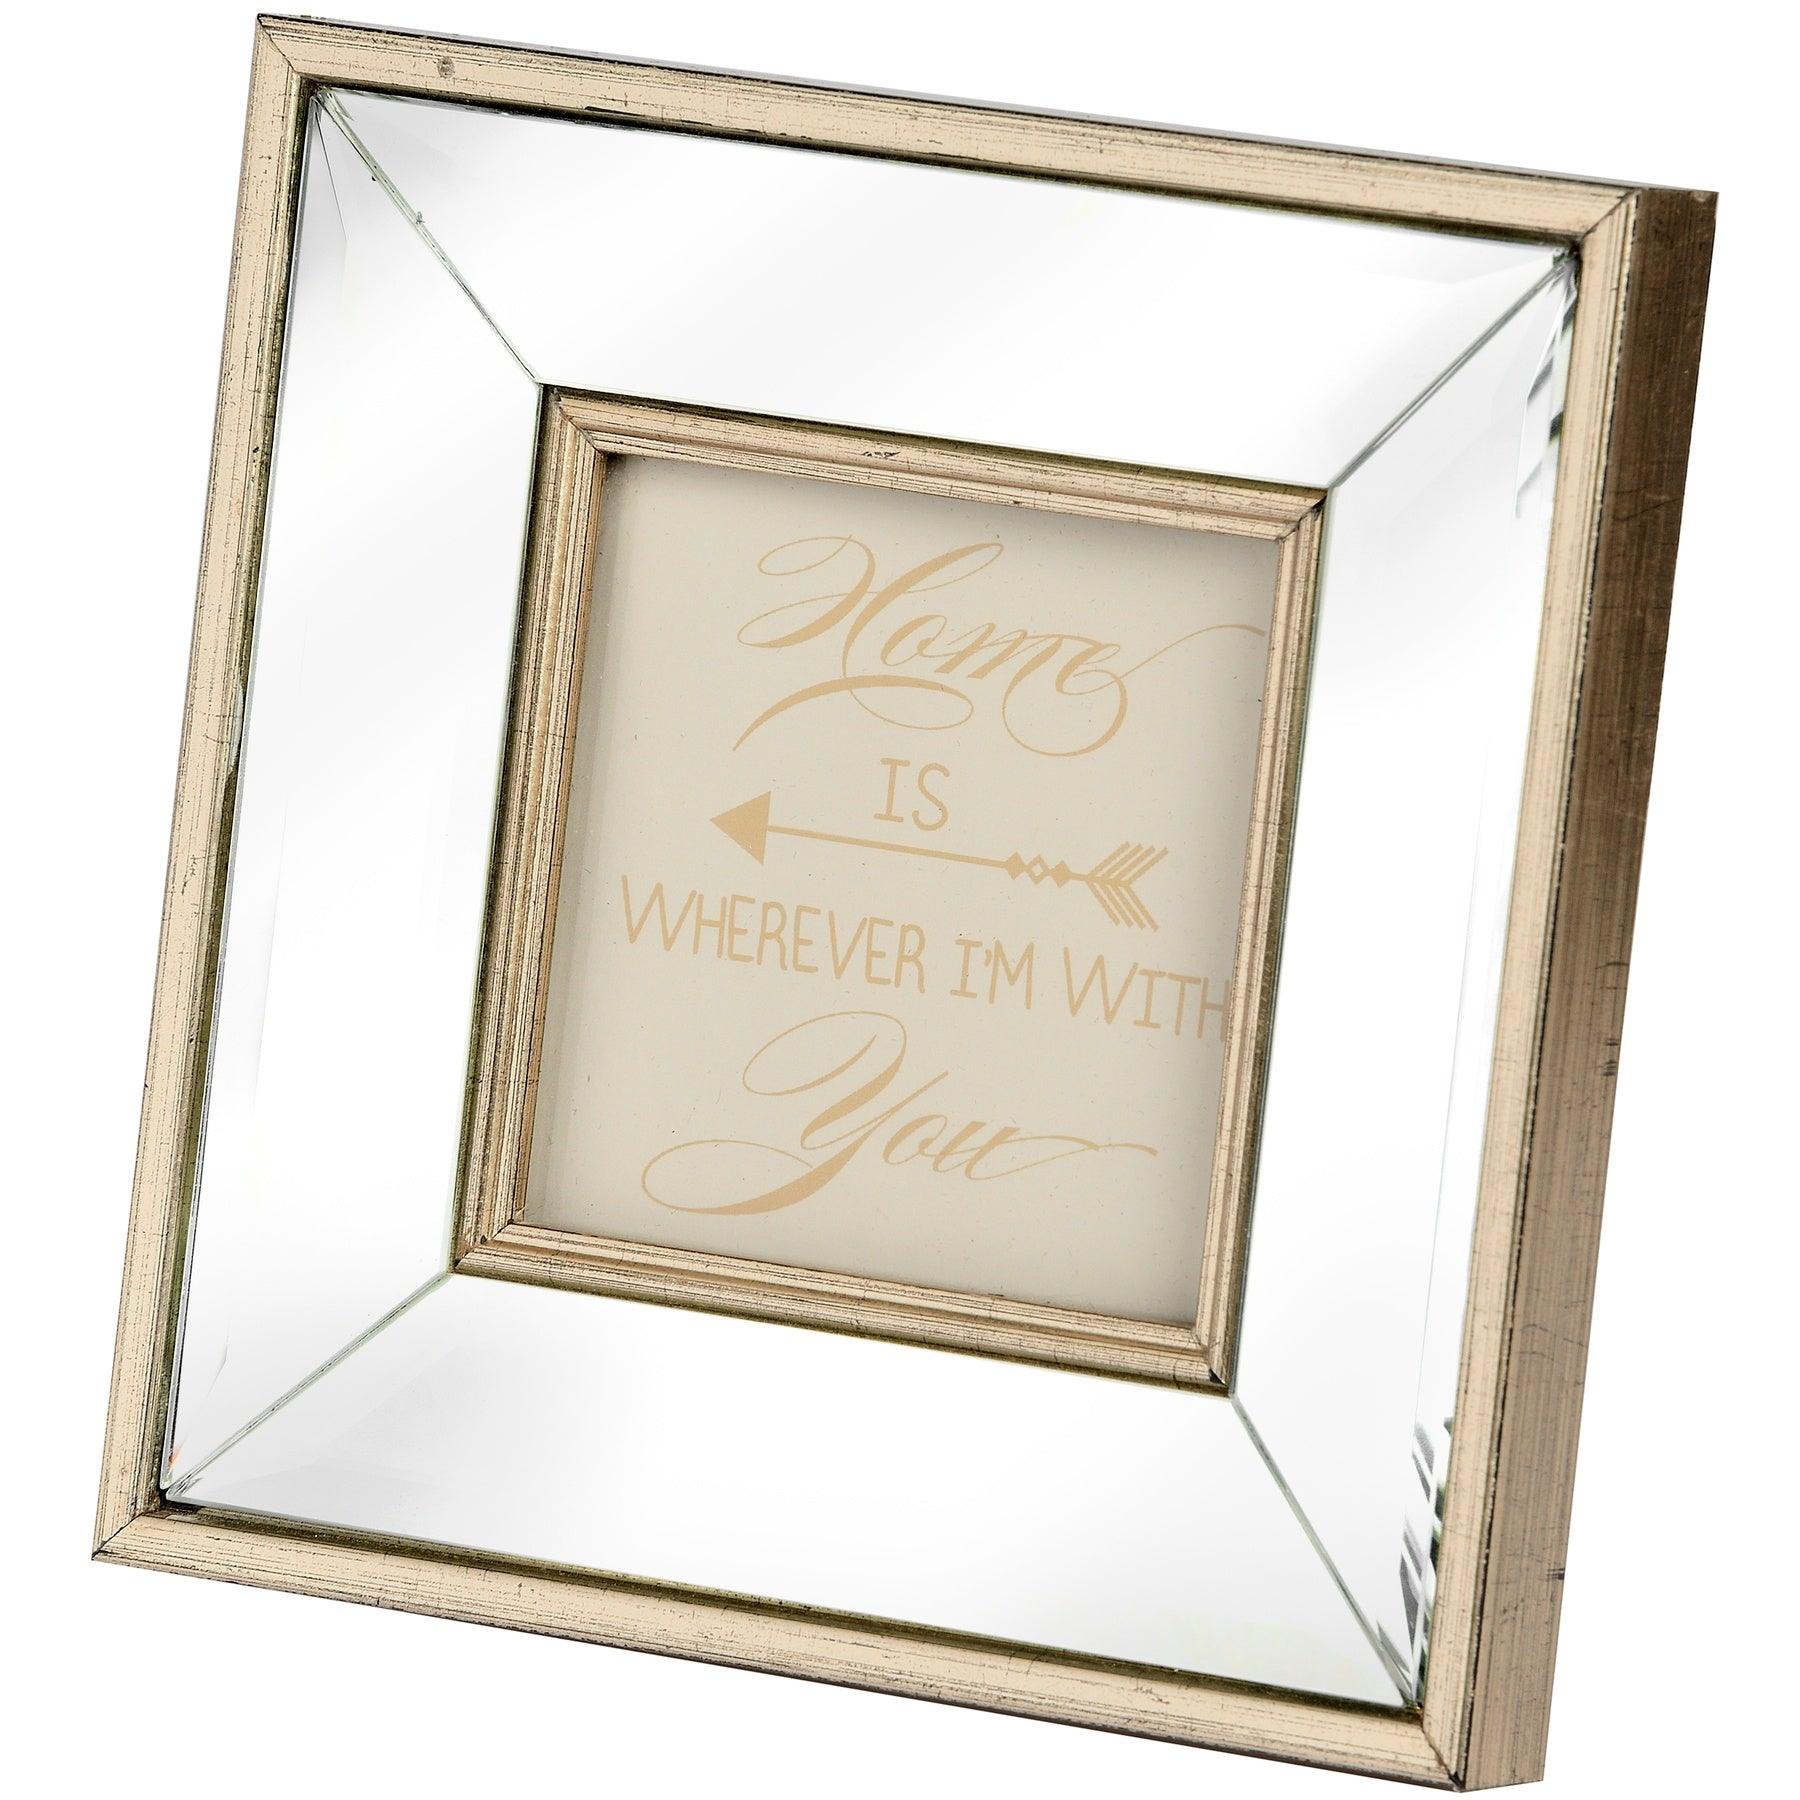 View Square Mirror Bordered Photo Frame 4x4 information